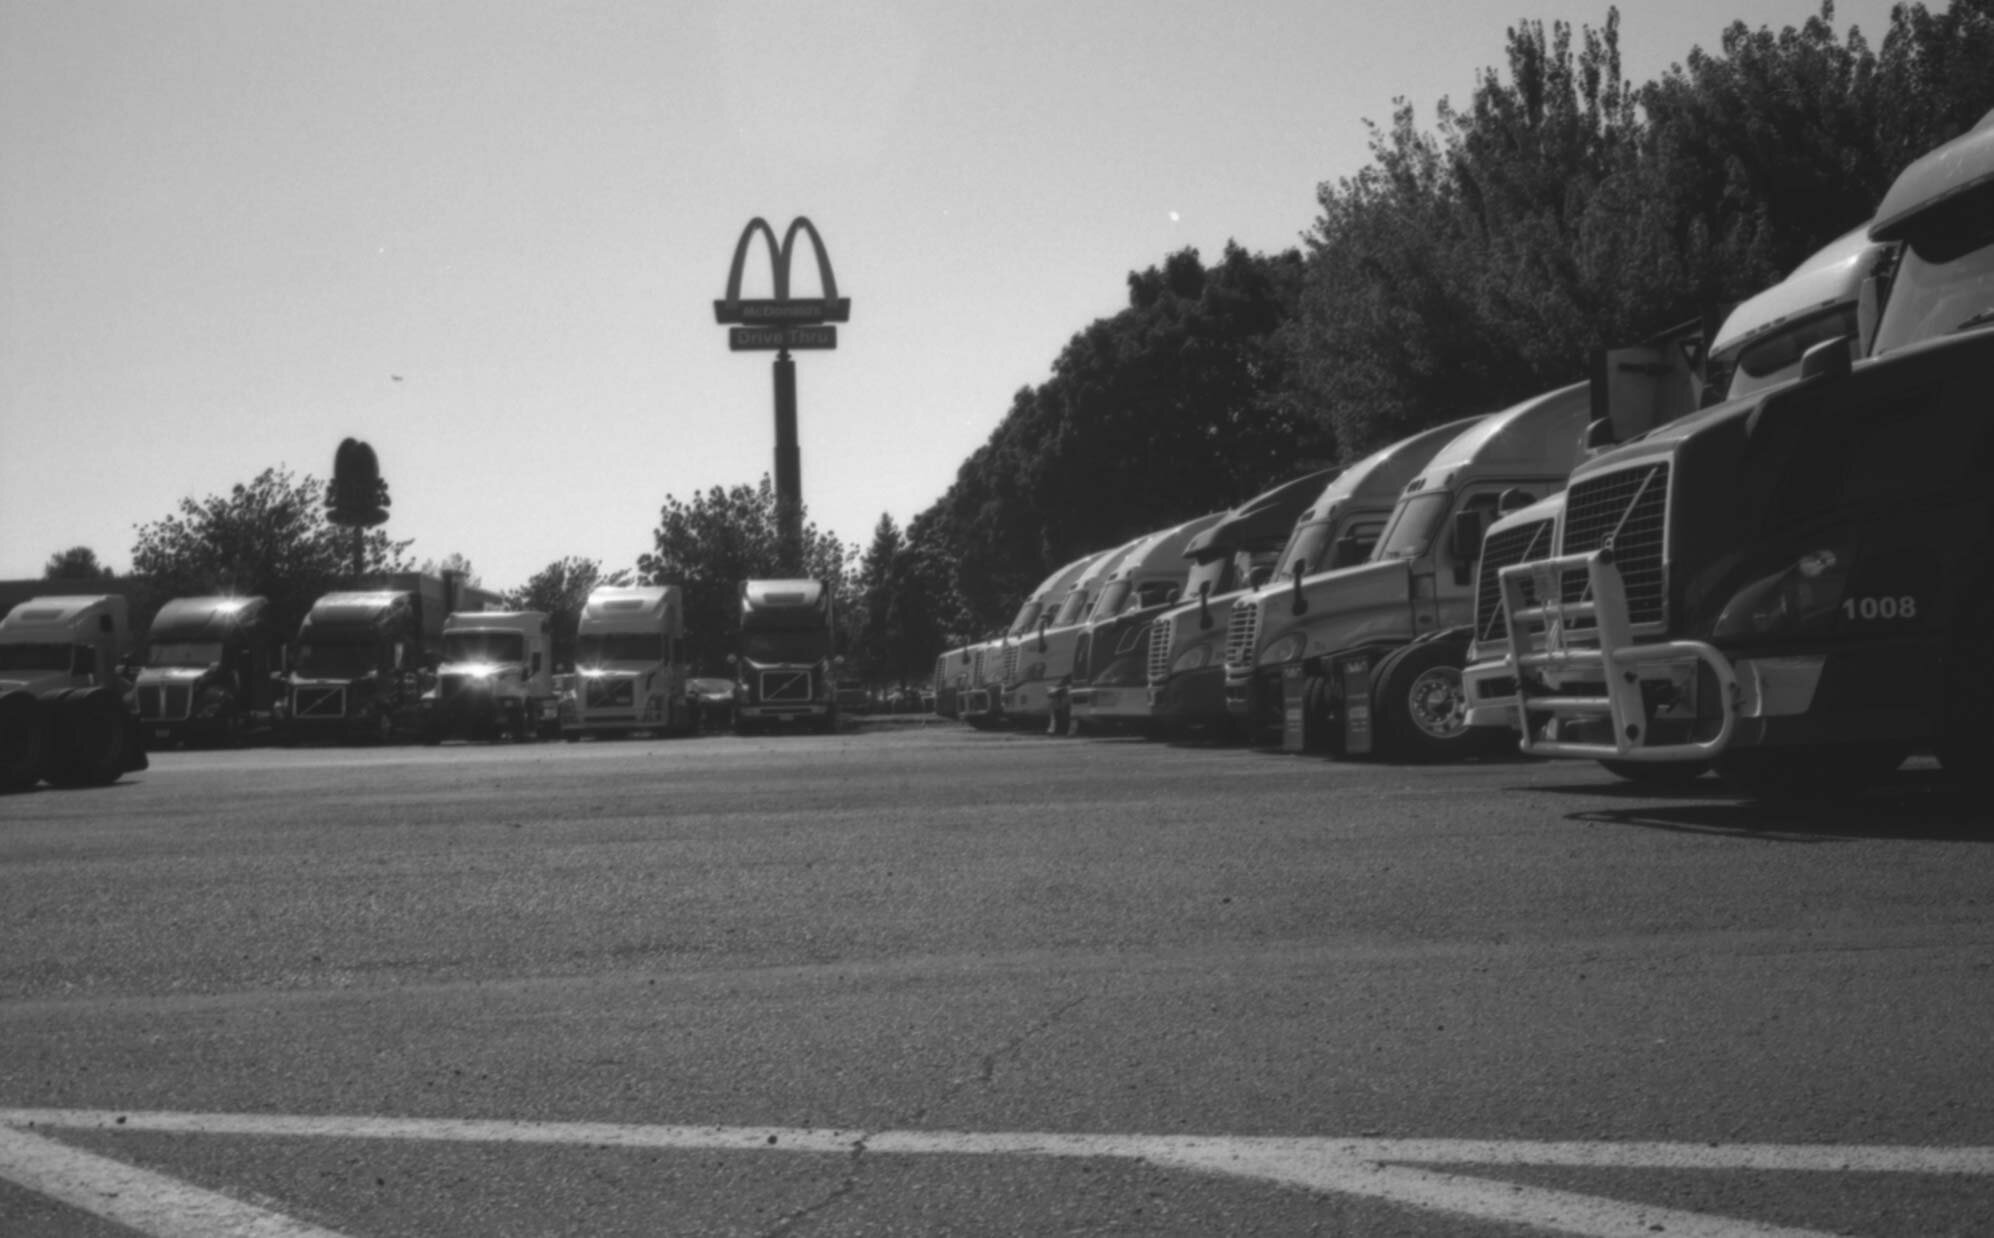 "I-84 TA Truck Stop, Portland OR, August 2021" 